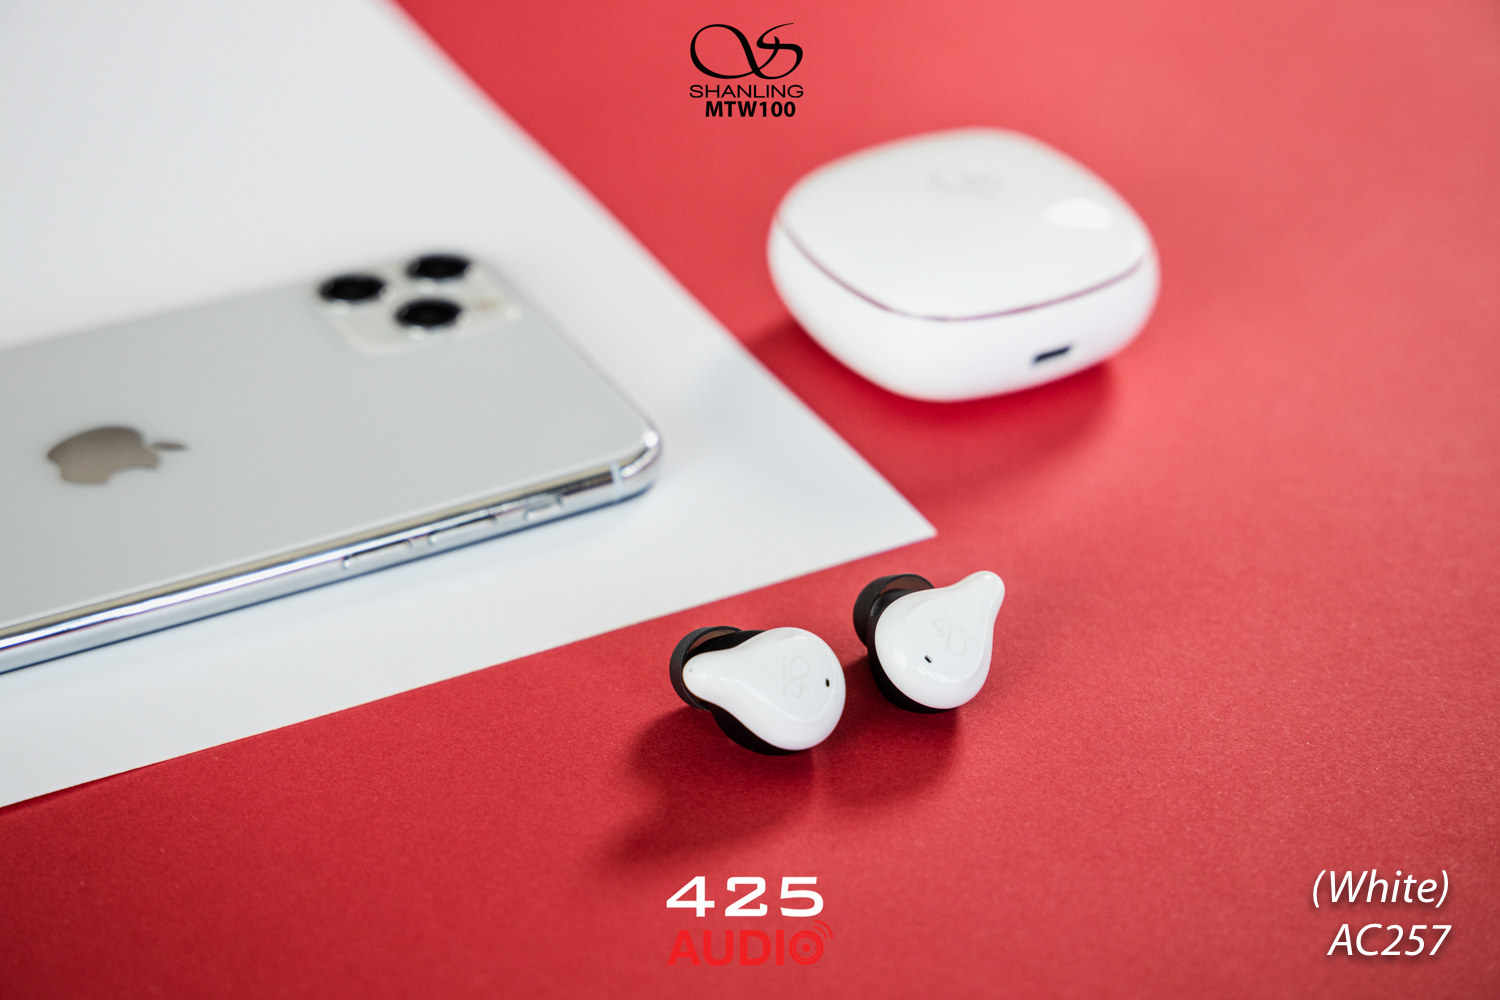 shanling,true wireless,shanling mtw100,white,dynamic driver,graphene,ipx7,ambient sound,in-ear,touch control,long battery life,bass,earphones,bluetooth 5.0